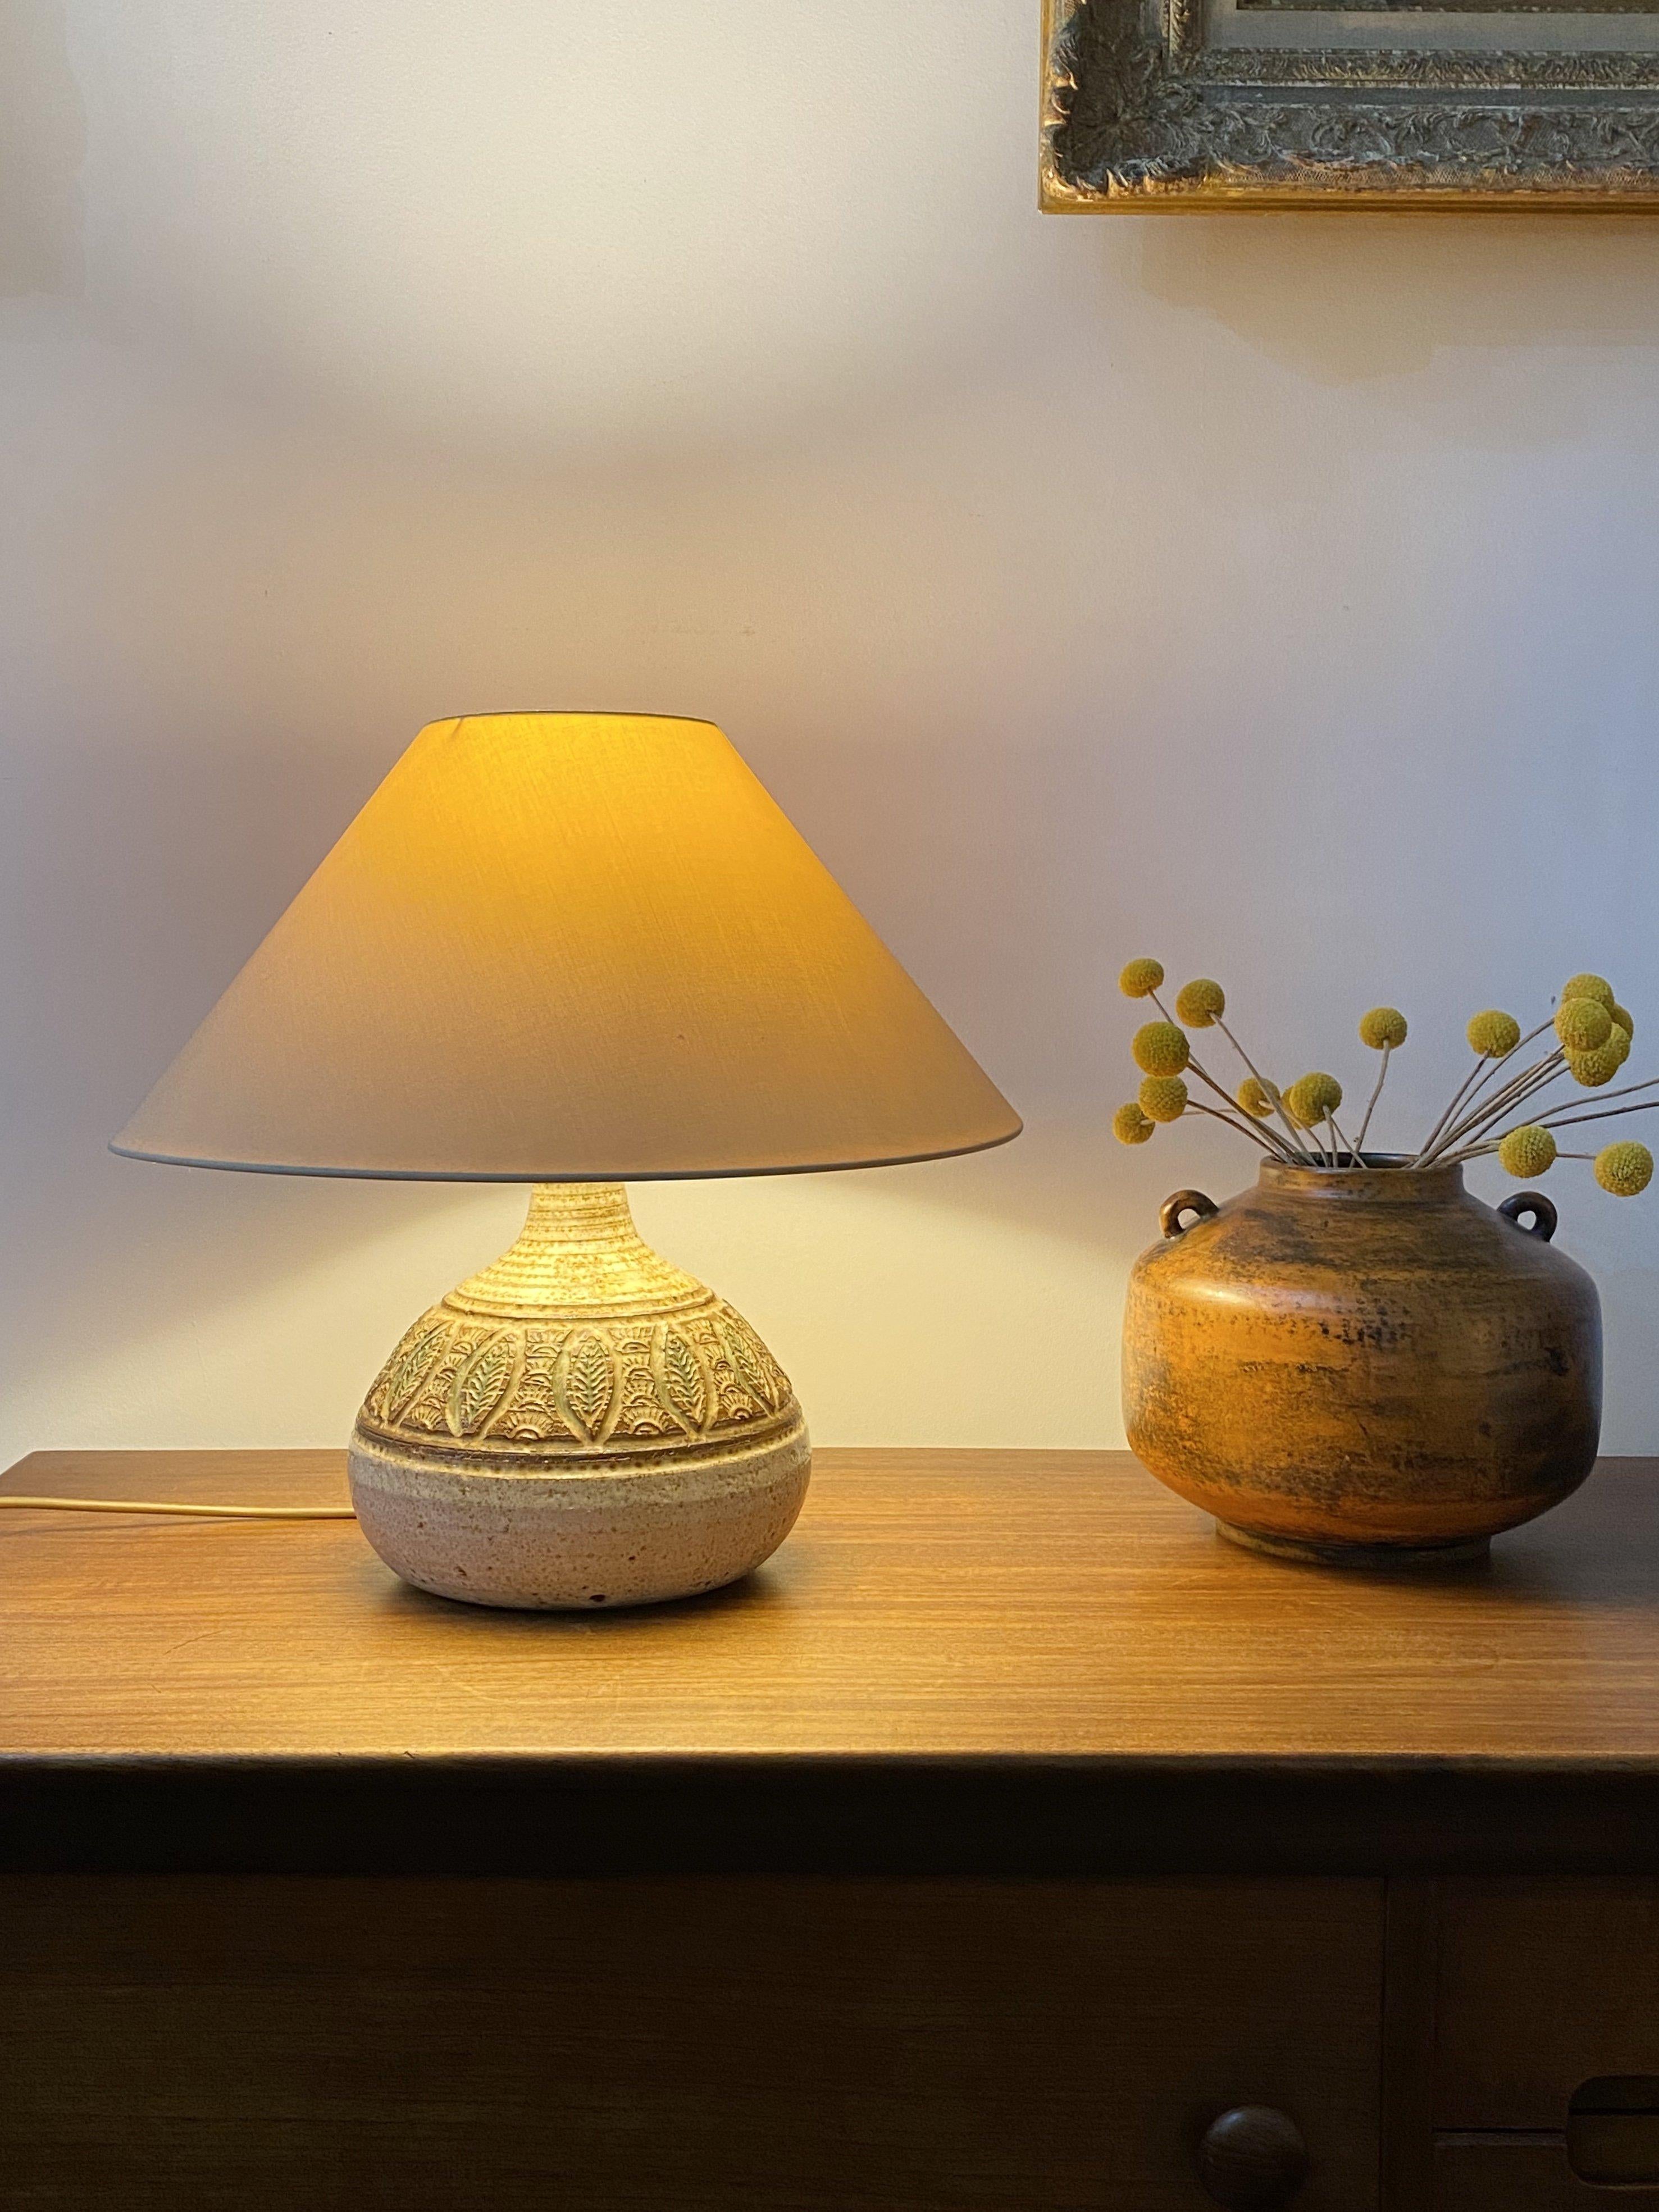 Midcentury ceramic glazed table lamp (circa 1960s) by Marcel Giraud, Vallauris, France. A piece with a graceful, rounded shape with wide centre in a muted chalk-colored base. This stunning lamp has a palm tree and leaf motif just above the centre